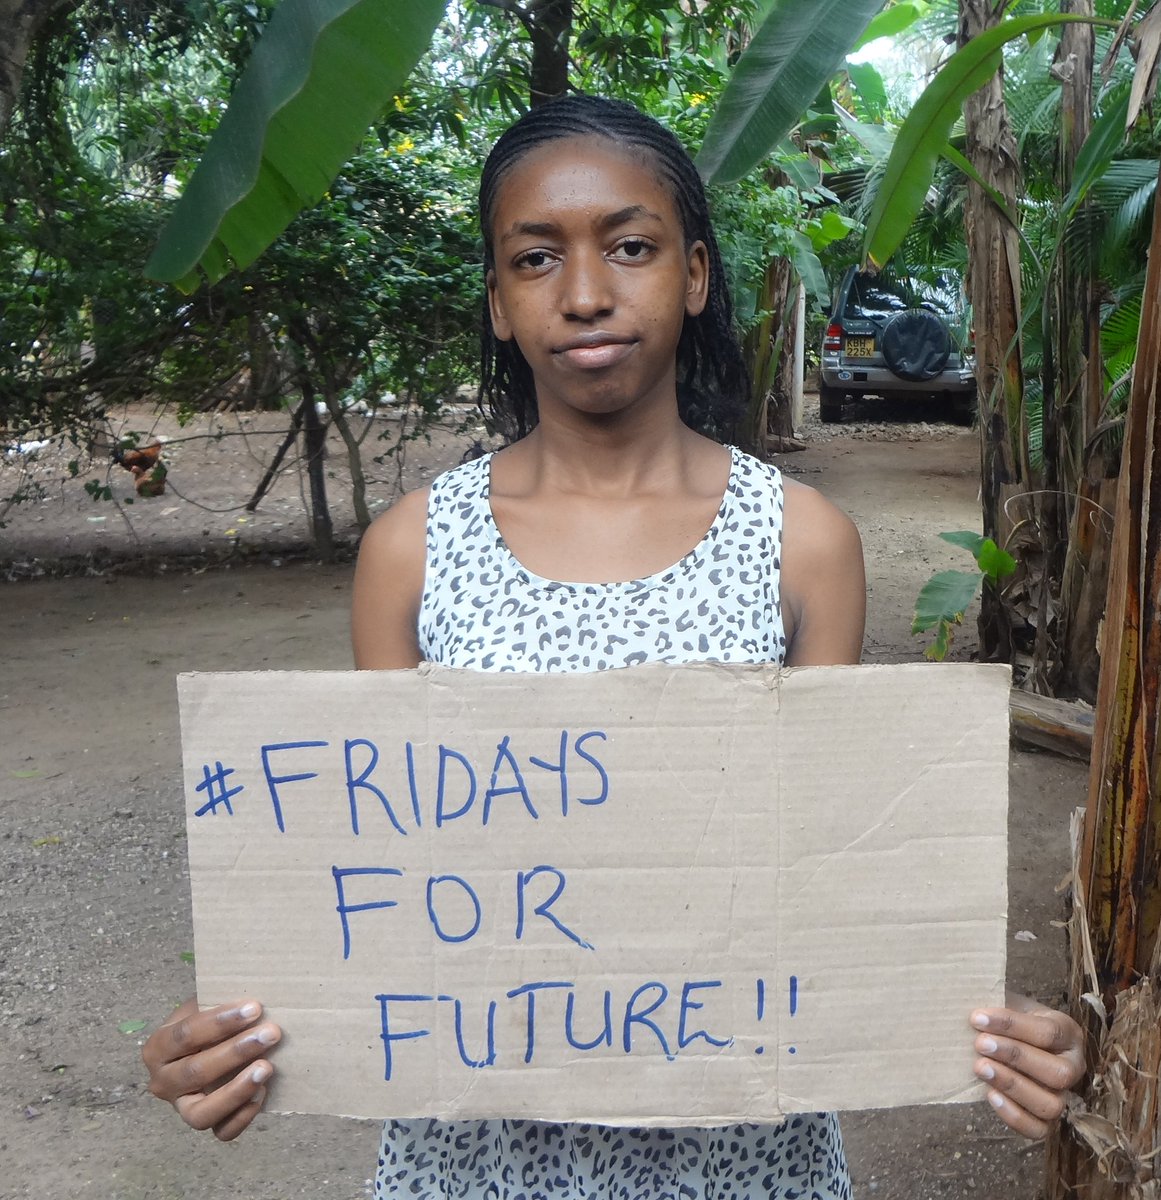 Climate strike week 30
Never under estimate the power of nature, the crisis will soon be beyond repair if we don't act now!

#ClimateCrisis #MindTheGap 
#FaceTheClimateEmergency 
#schoolstrike4climate 
#ClimateAction #onebilliontreesforafrica
@GretaThunberg @vanessa_vash